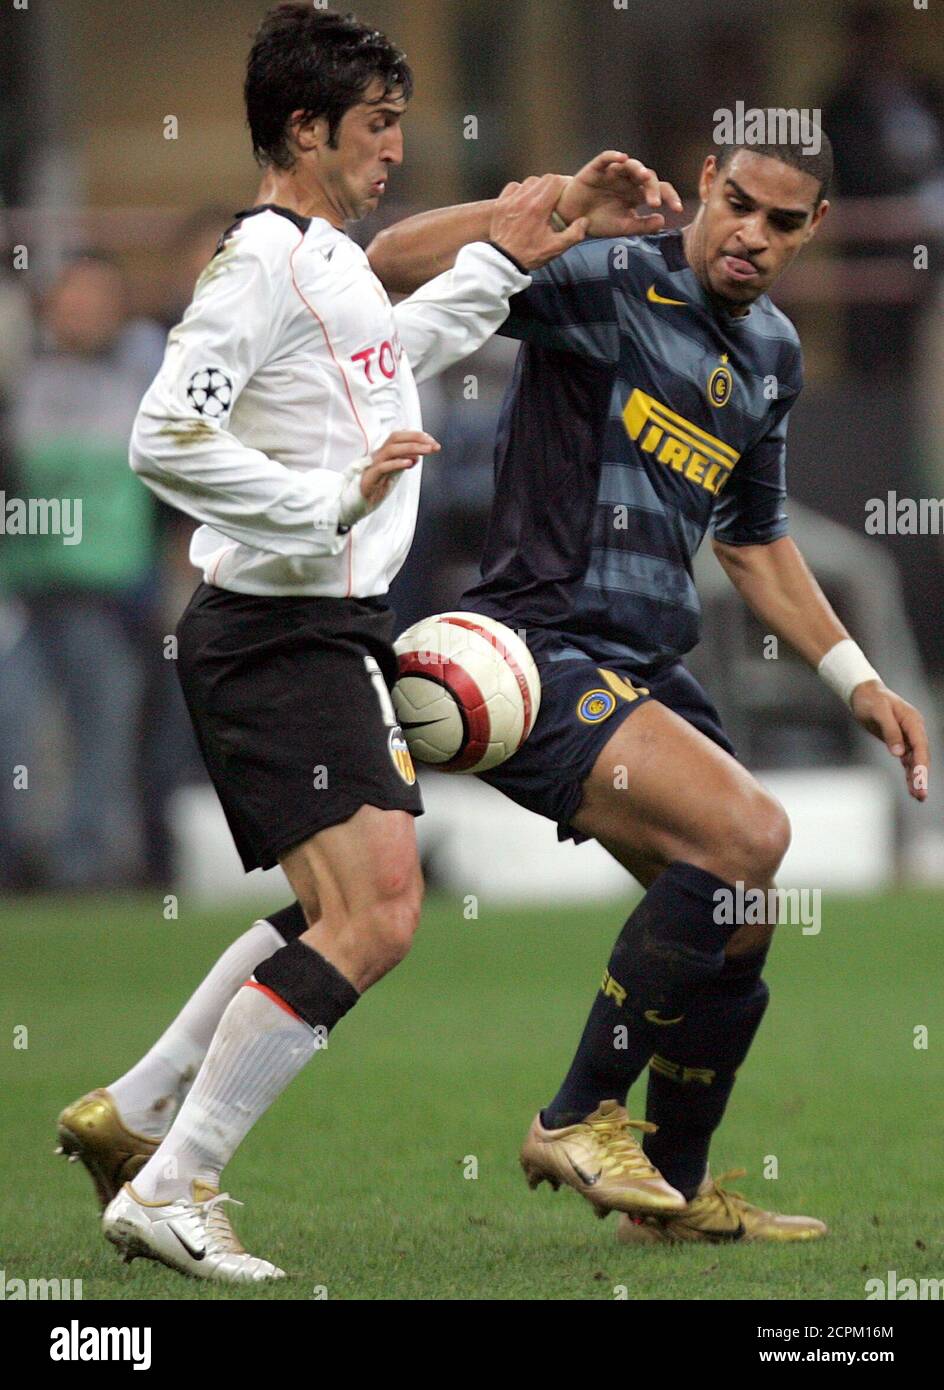 Inter Milan's Adriano (R) challenges Marco Caneira of Valencia during their  Champions League Group G match